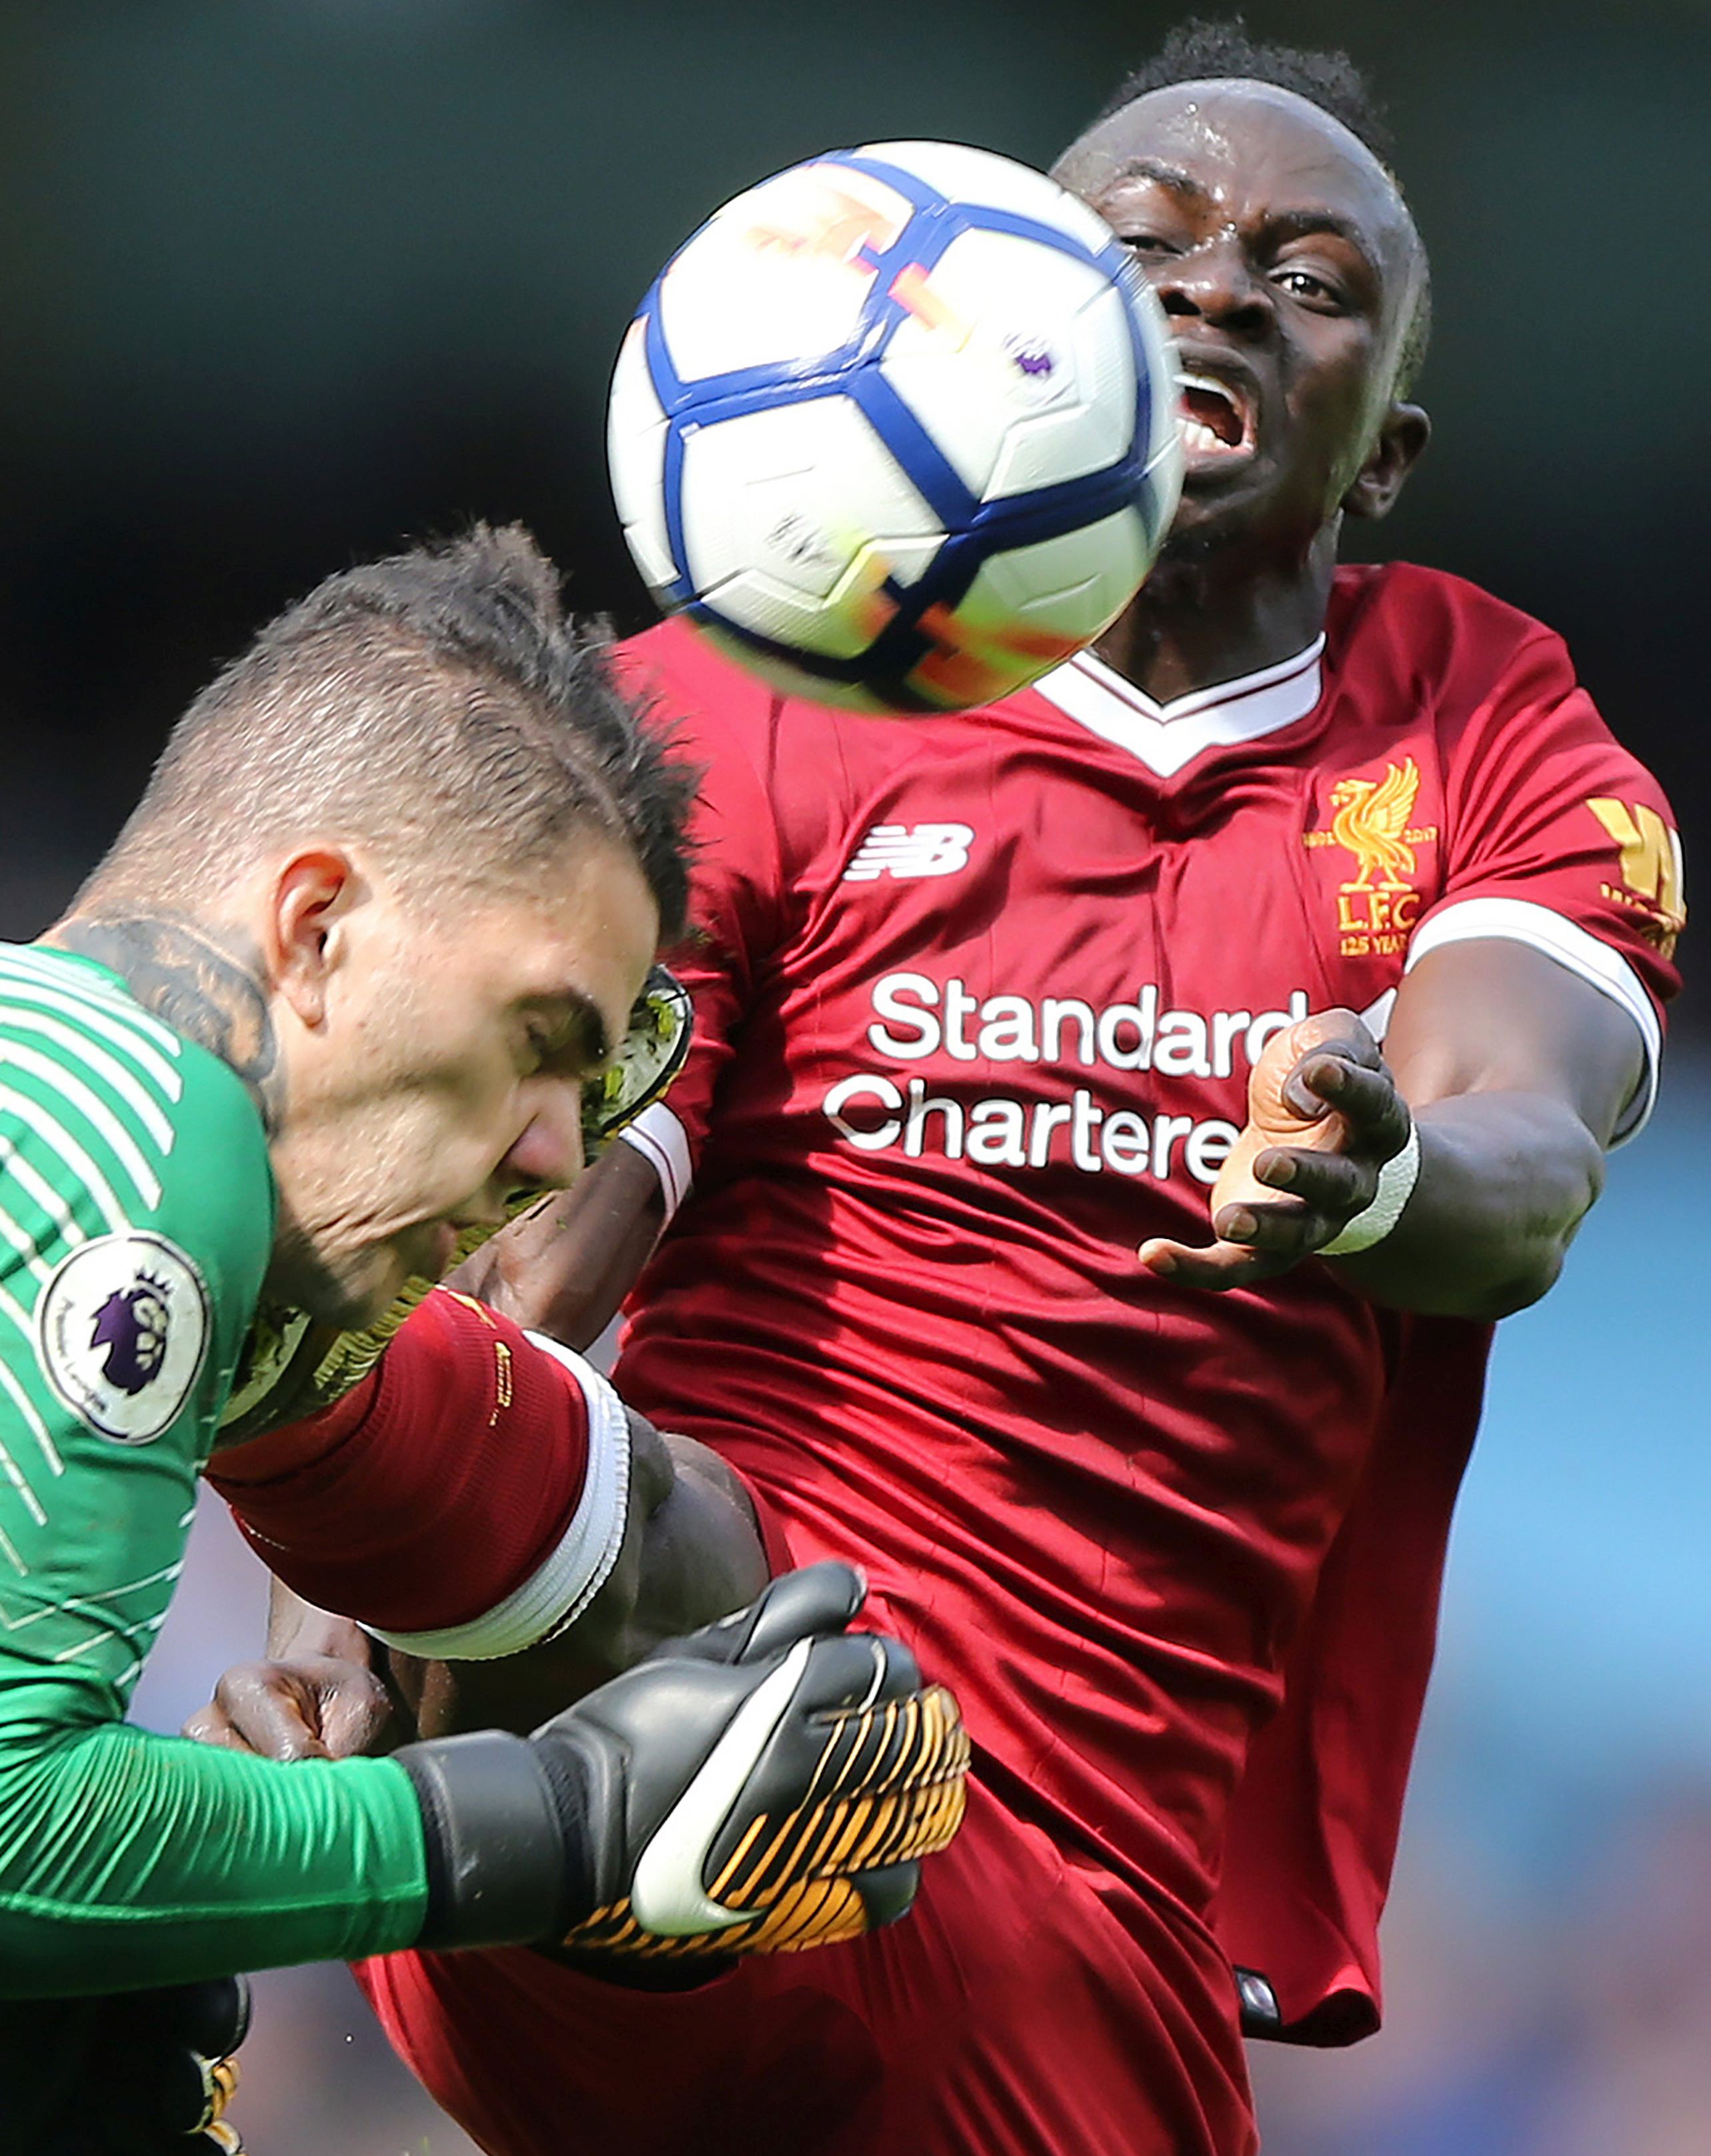 epa06193885 Manchester City's goalkeeper Ederson Santana de Moraes (L) is fouled by Liverpool's Sadio Mane during the English Premier League soccer match between Manchester City and Liverpool FC at the Etihad Stadium in Manchester, Britain, 09 September 2017.  EPA/NIGEL RODDIS EDITORIAL USE ONLY. No use with unauthorised audio, video, data, fixture lists, club/league logos 'live' services. Online in-match use limited to 75 images, no video emulation. No use in betting, games or single club/league/player publications.